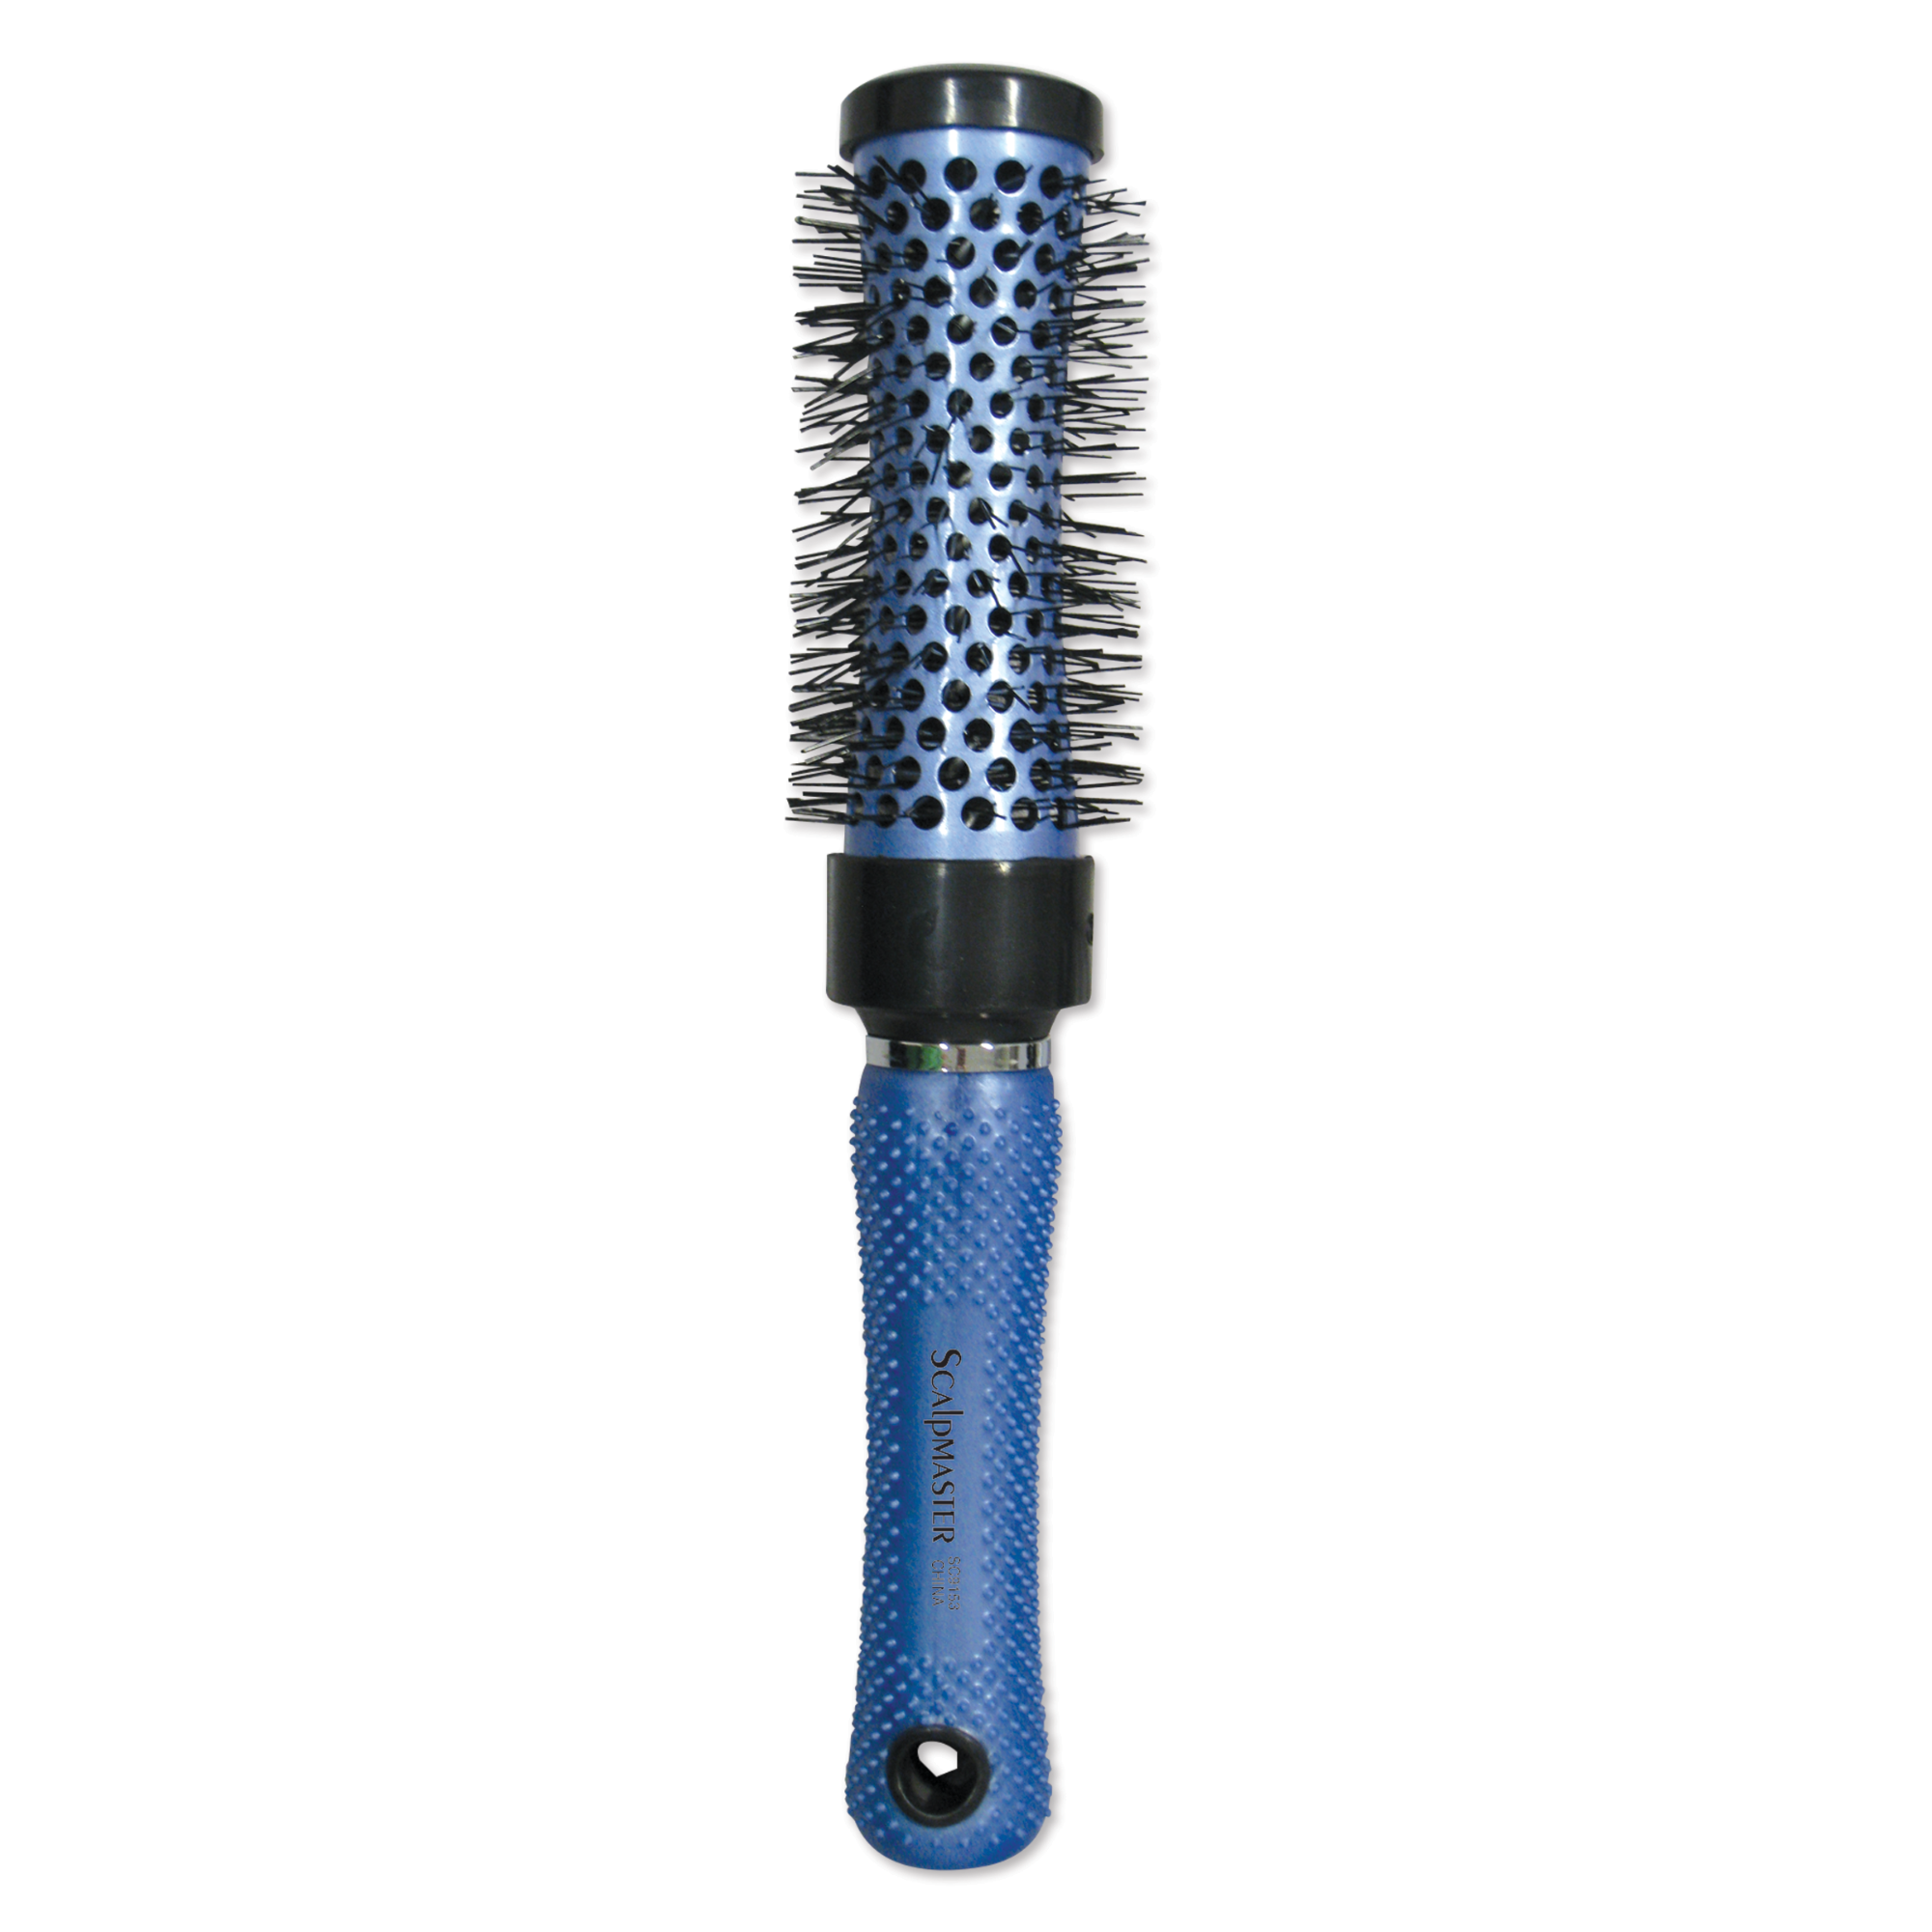 Concave Thermal Brush with Rubber Handle - 1-1/2"